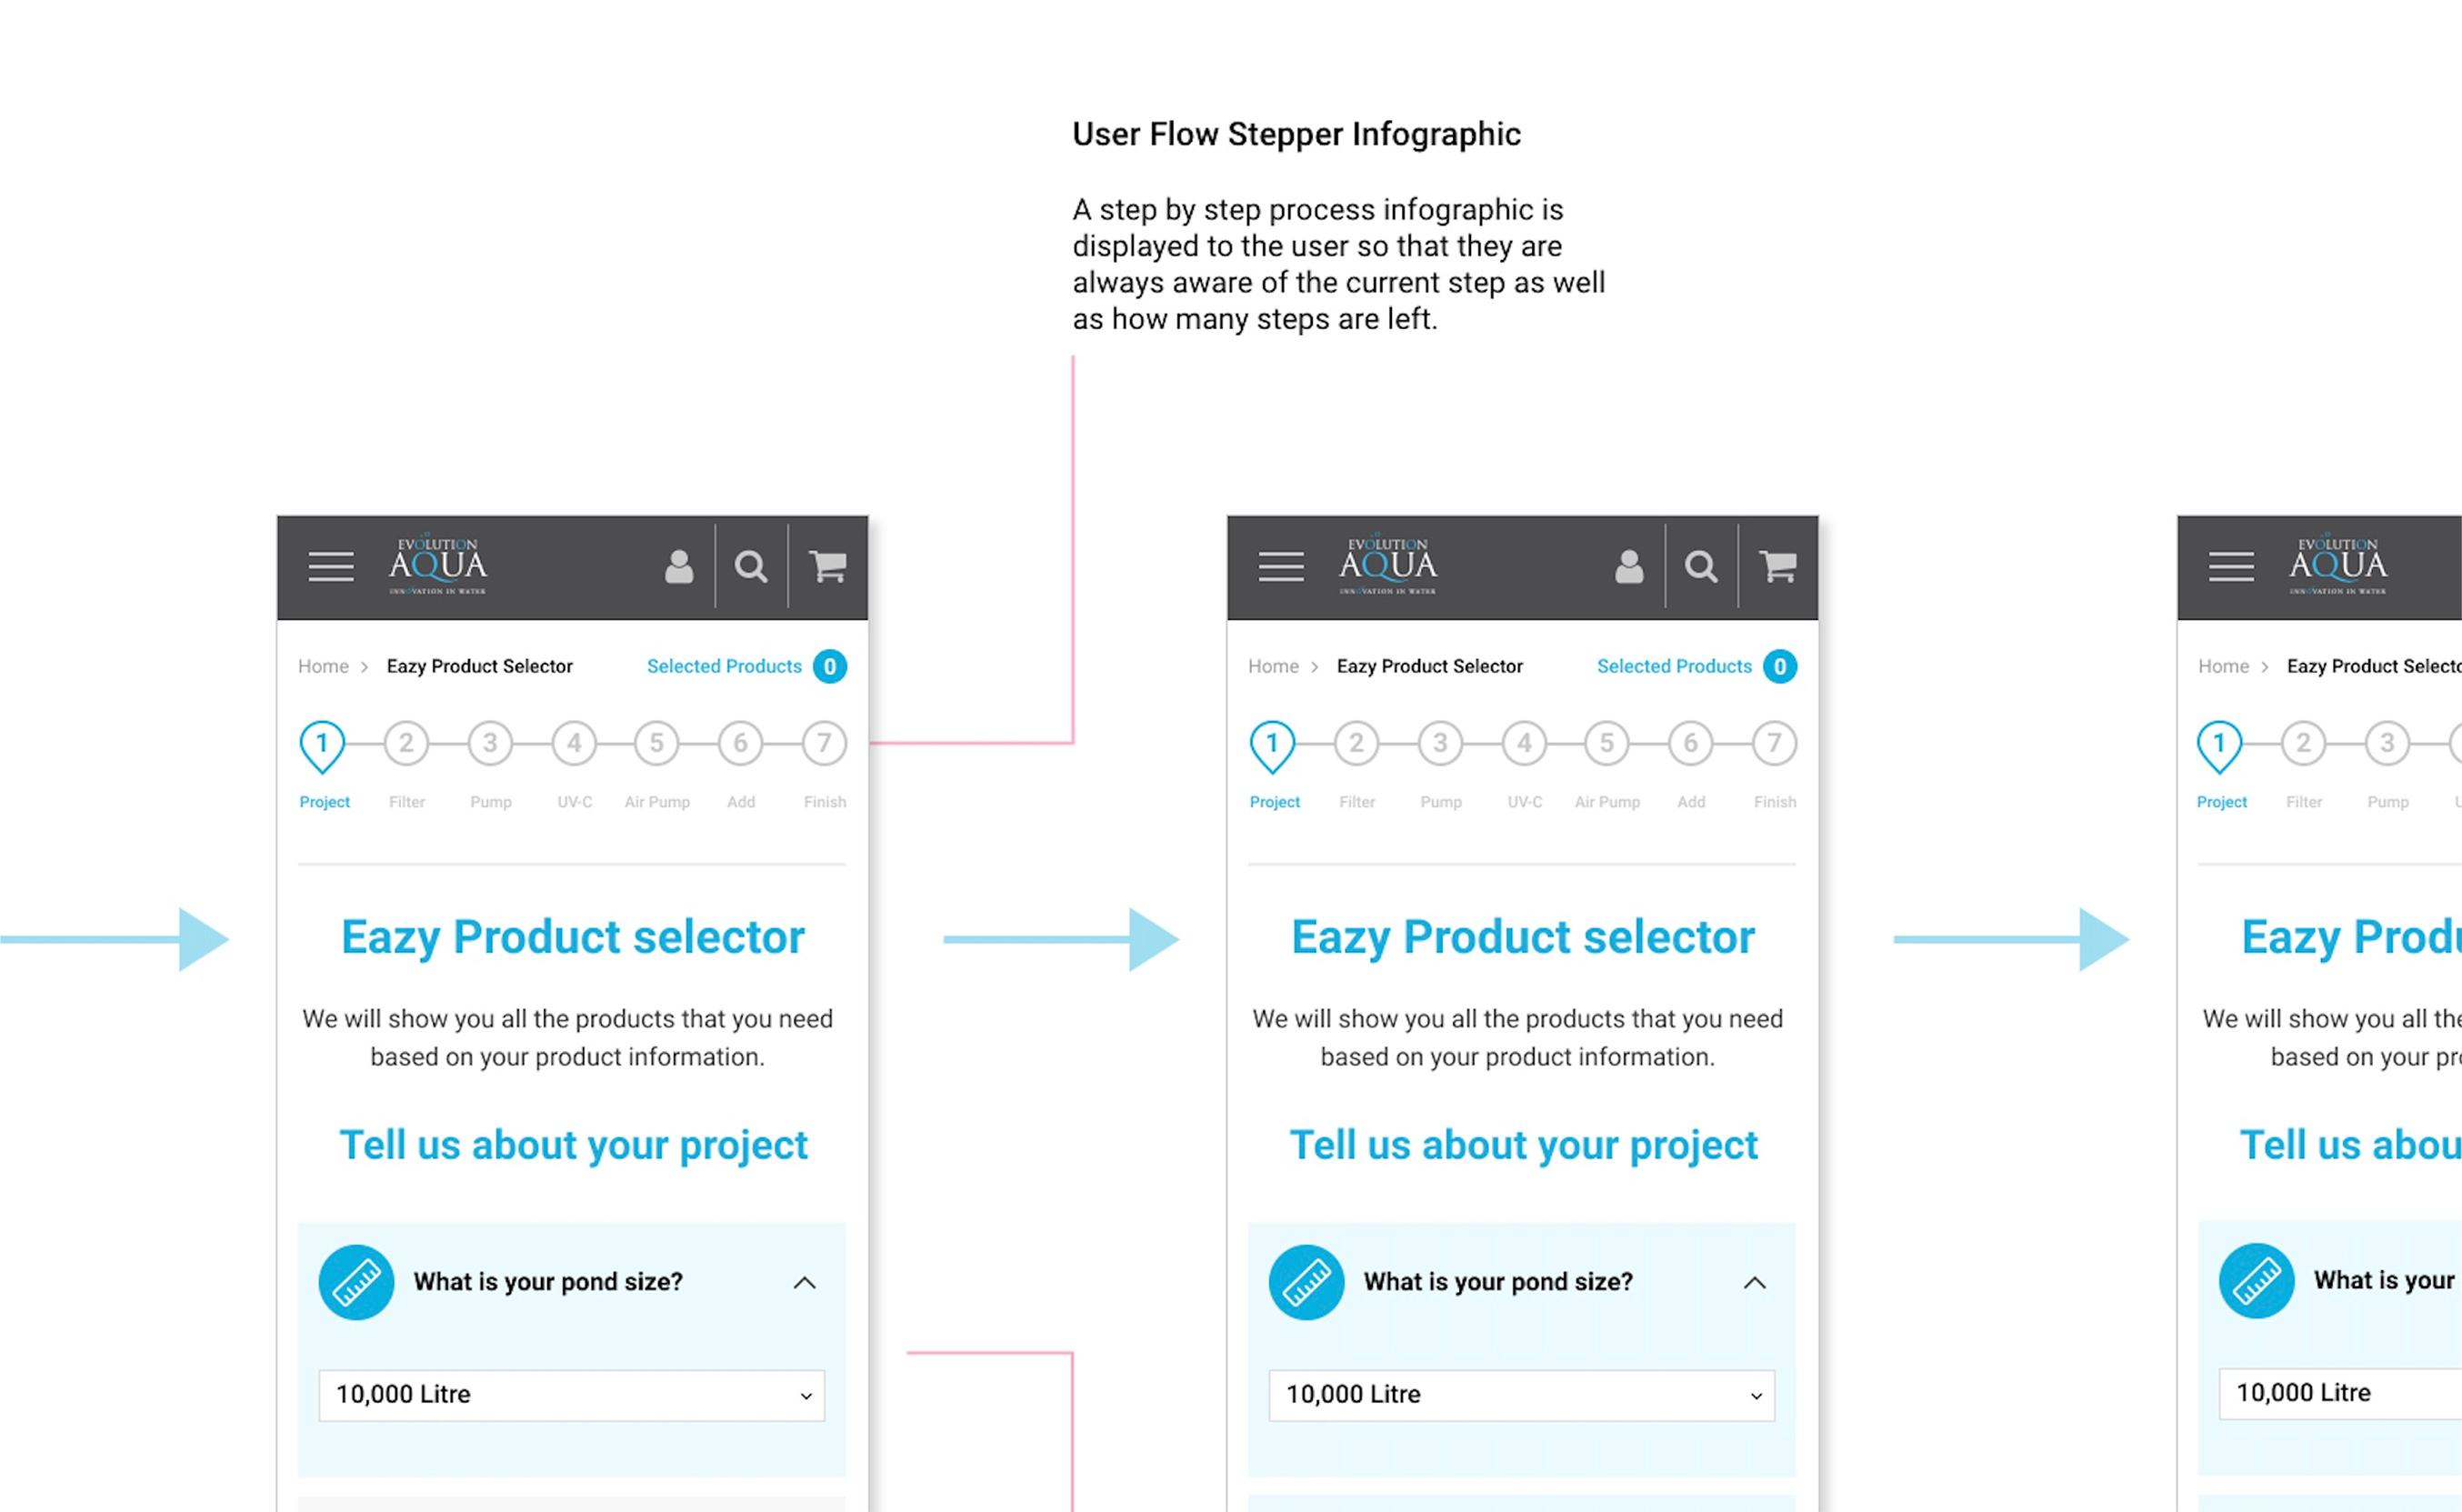 Image showing the user flow stepper infographic on-page.